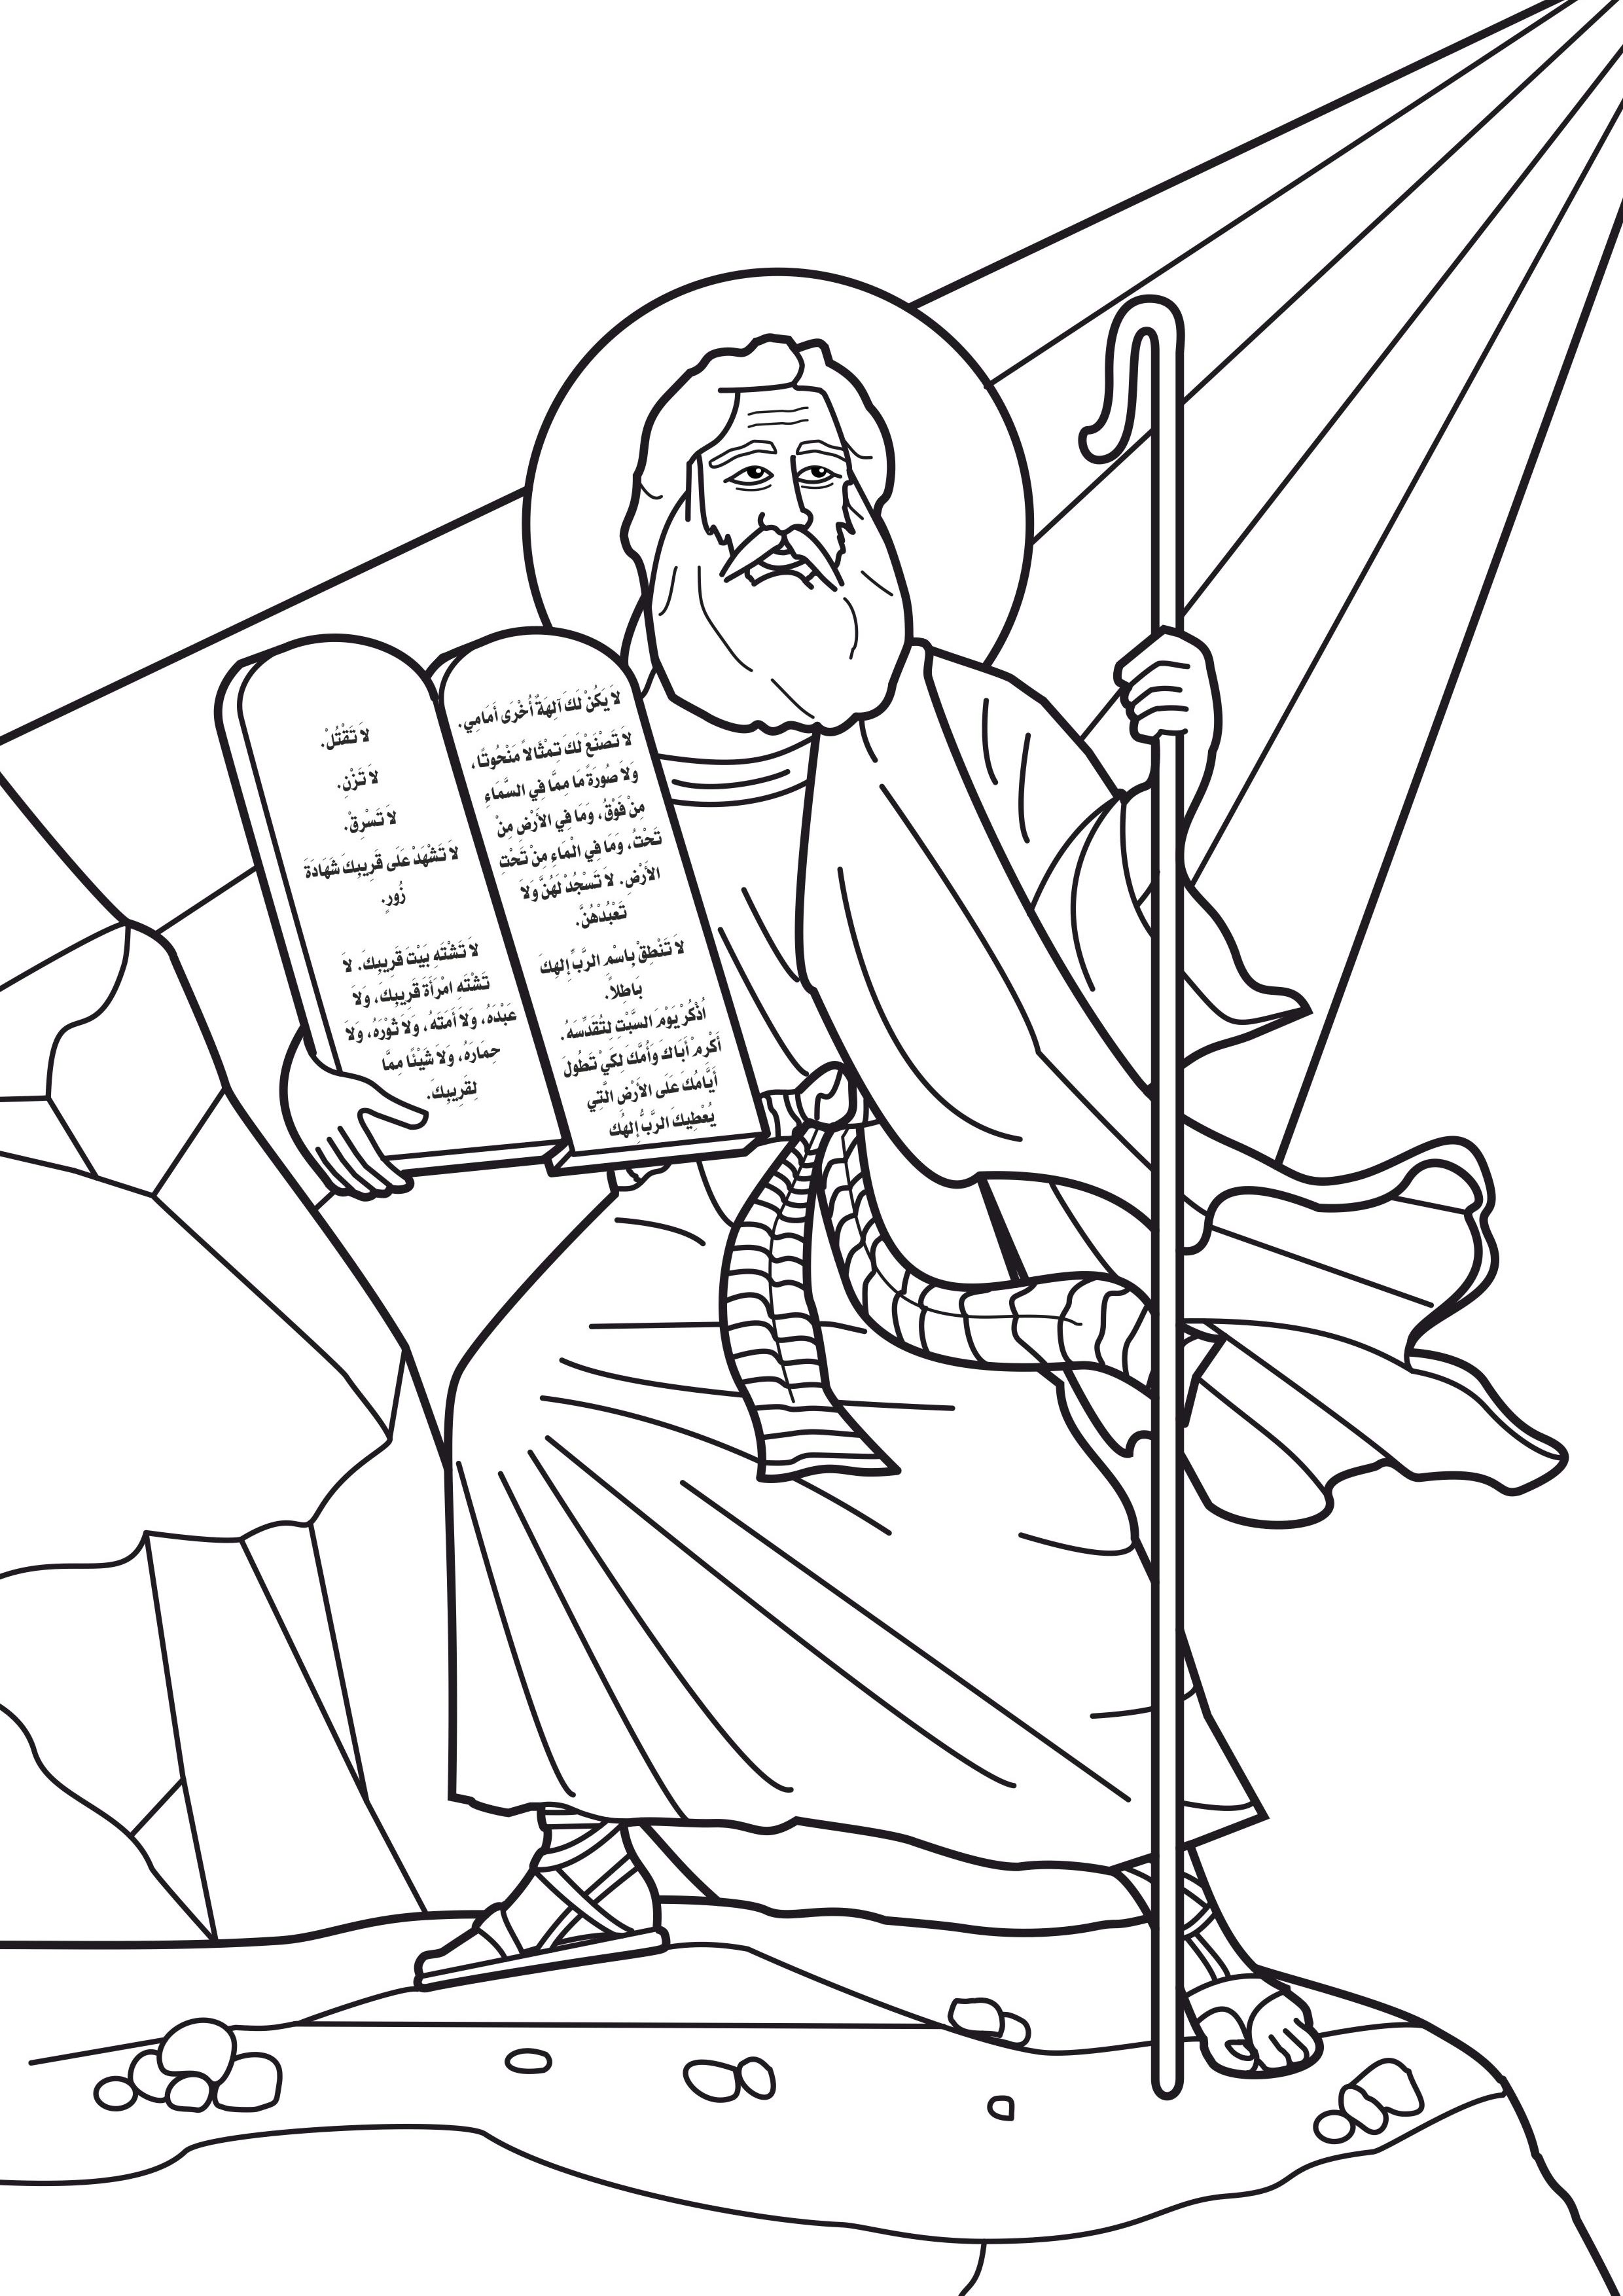 125 Animal Commandments Coloring Page for Kindergarten